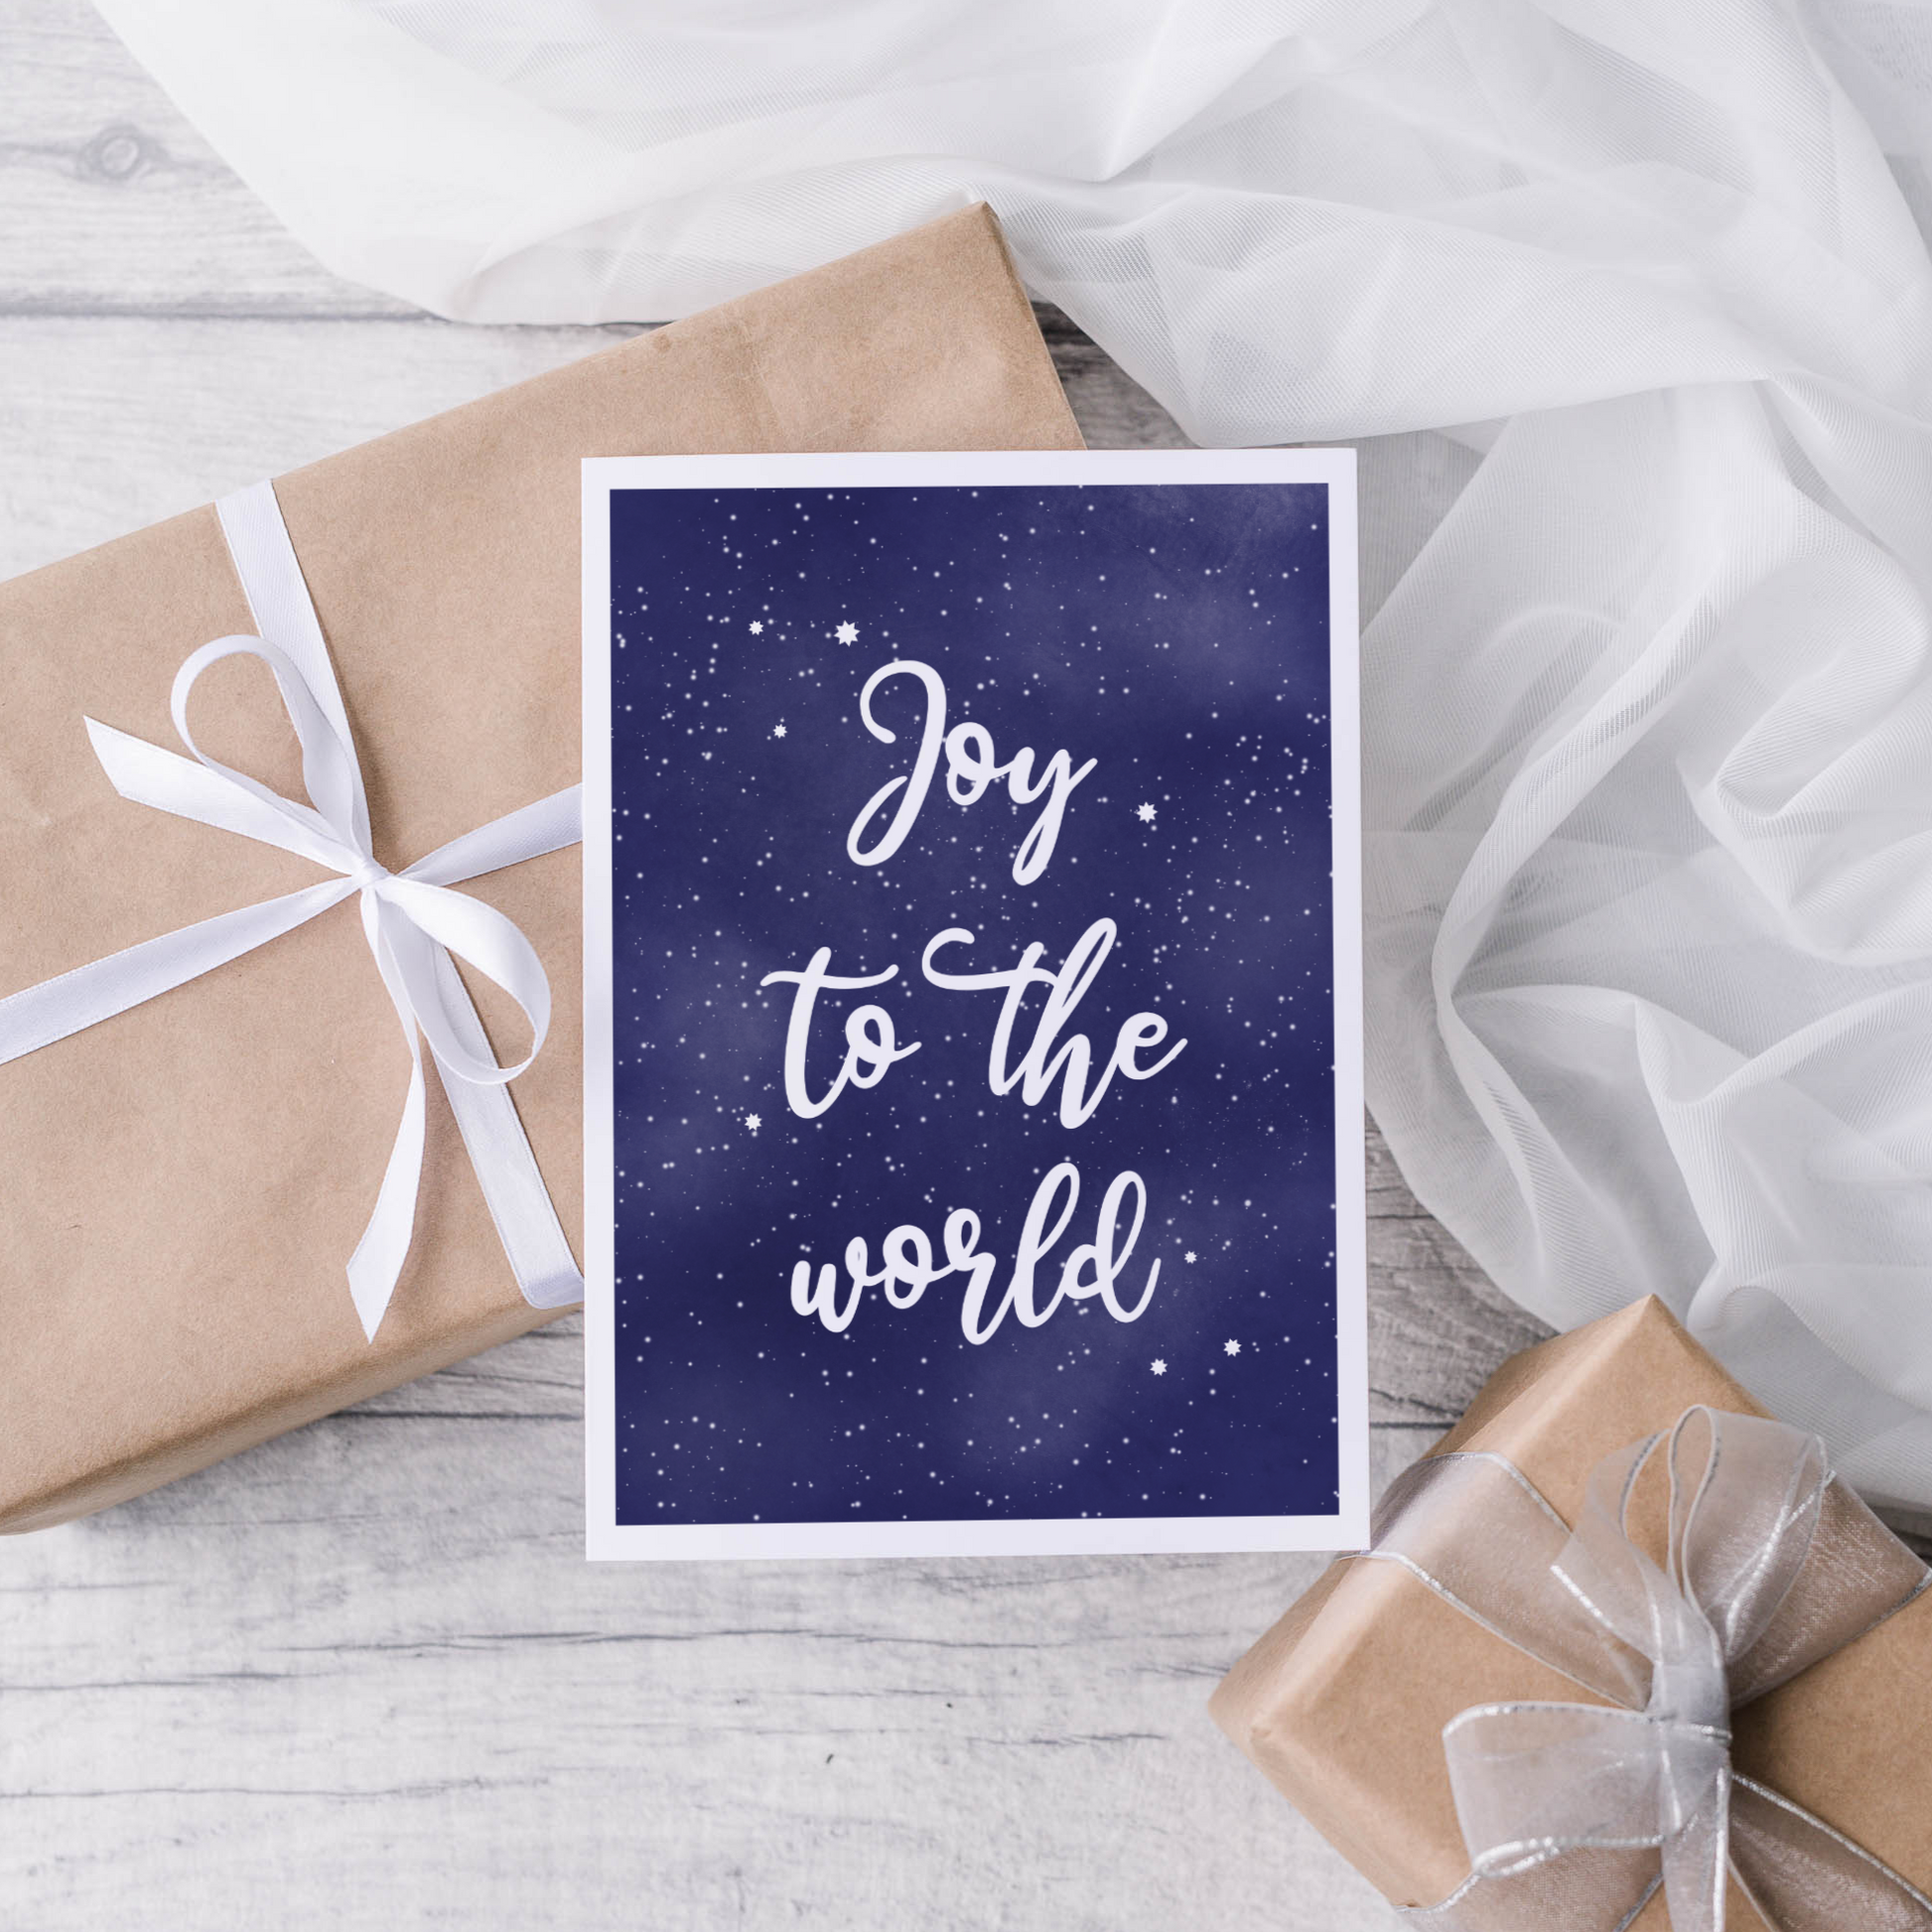 Text Joy to the world in white set against a night sky background with white border